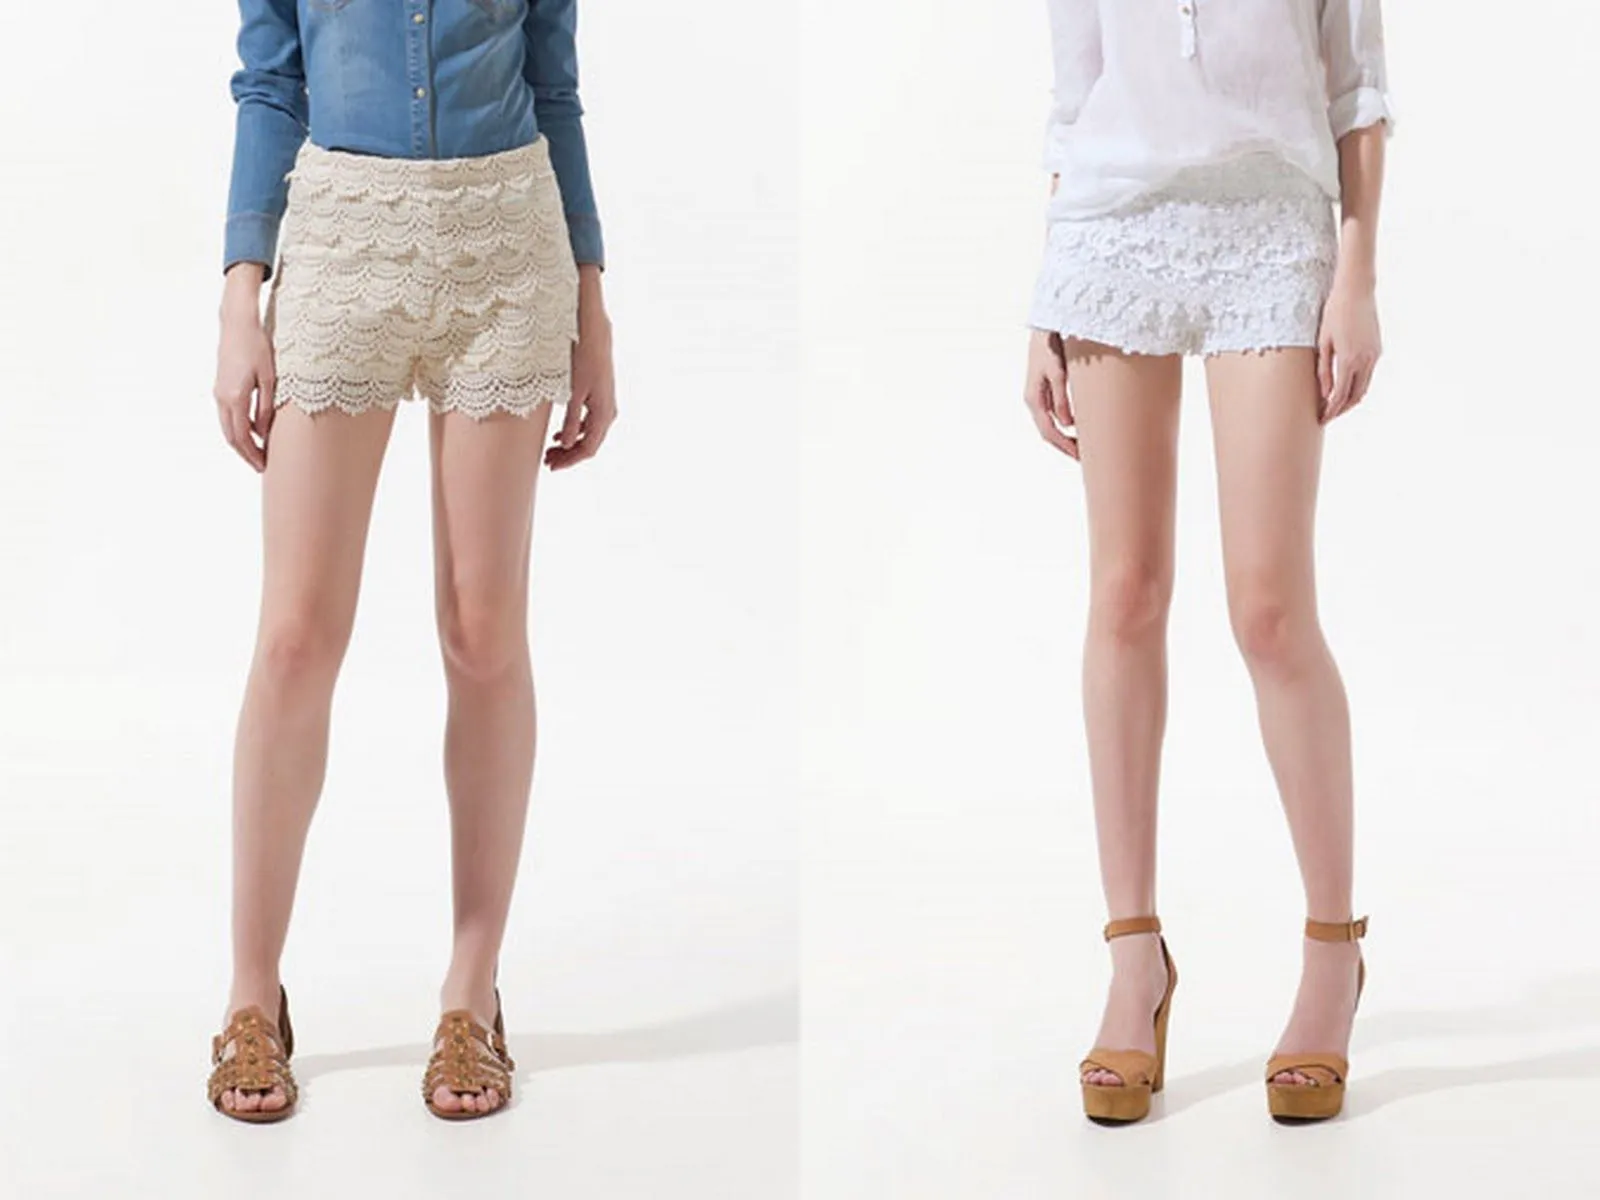 Pretty Cute and Outrageous: Pretty and Cute Crochet Shorts!